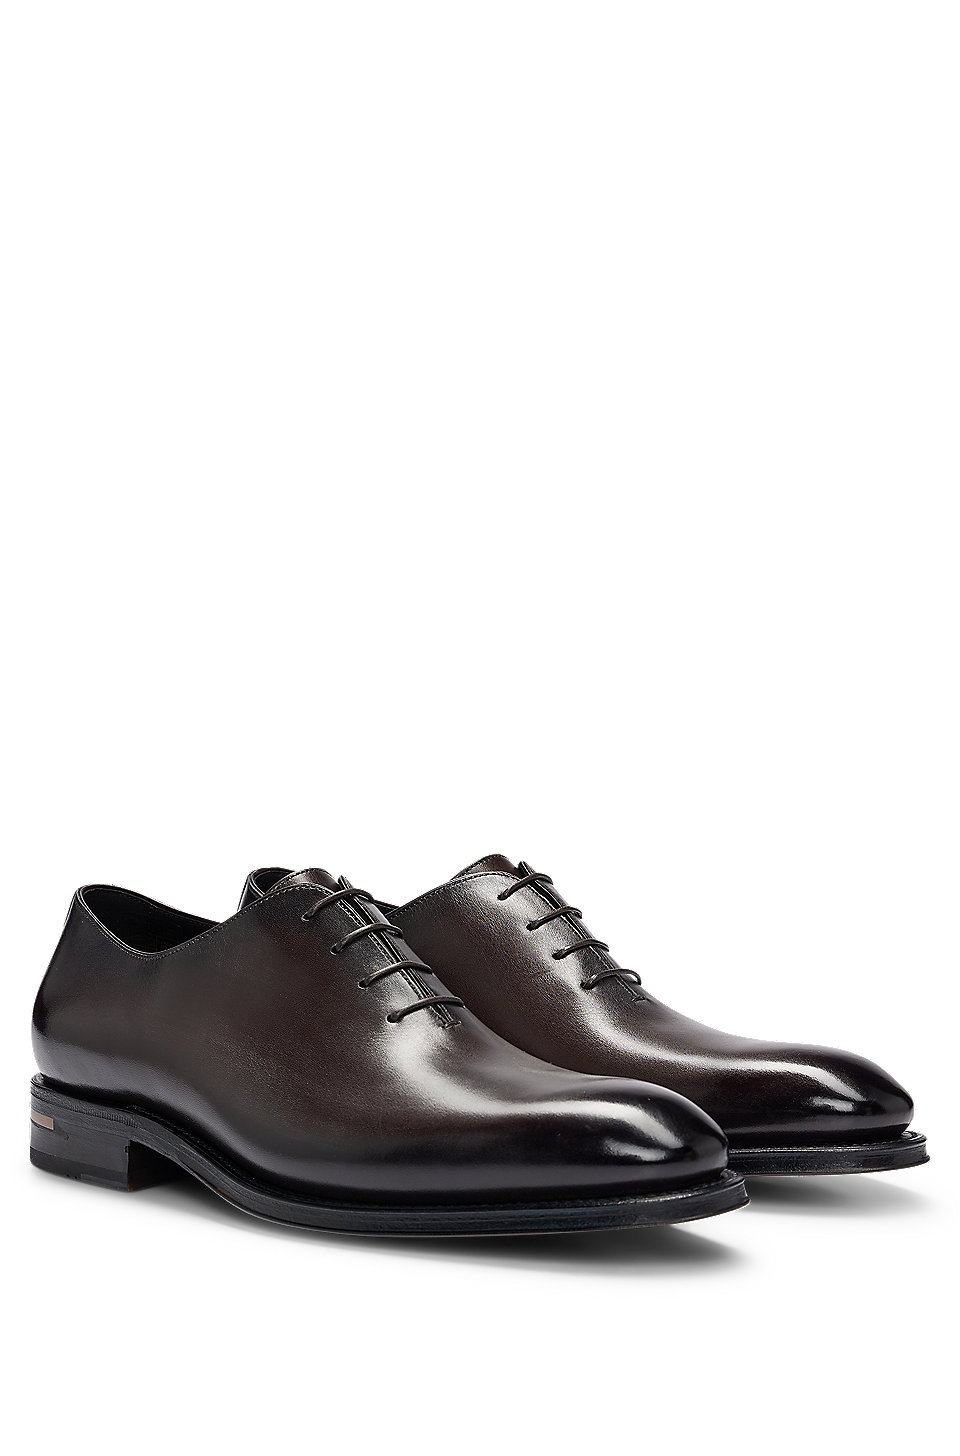 BOSS - Leather Oxford shoes with burnished effect